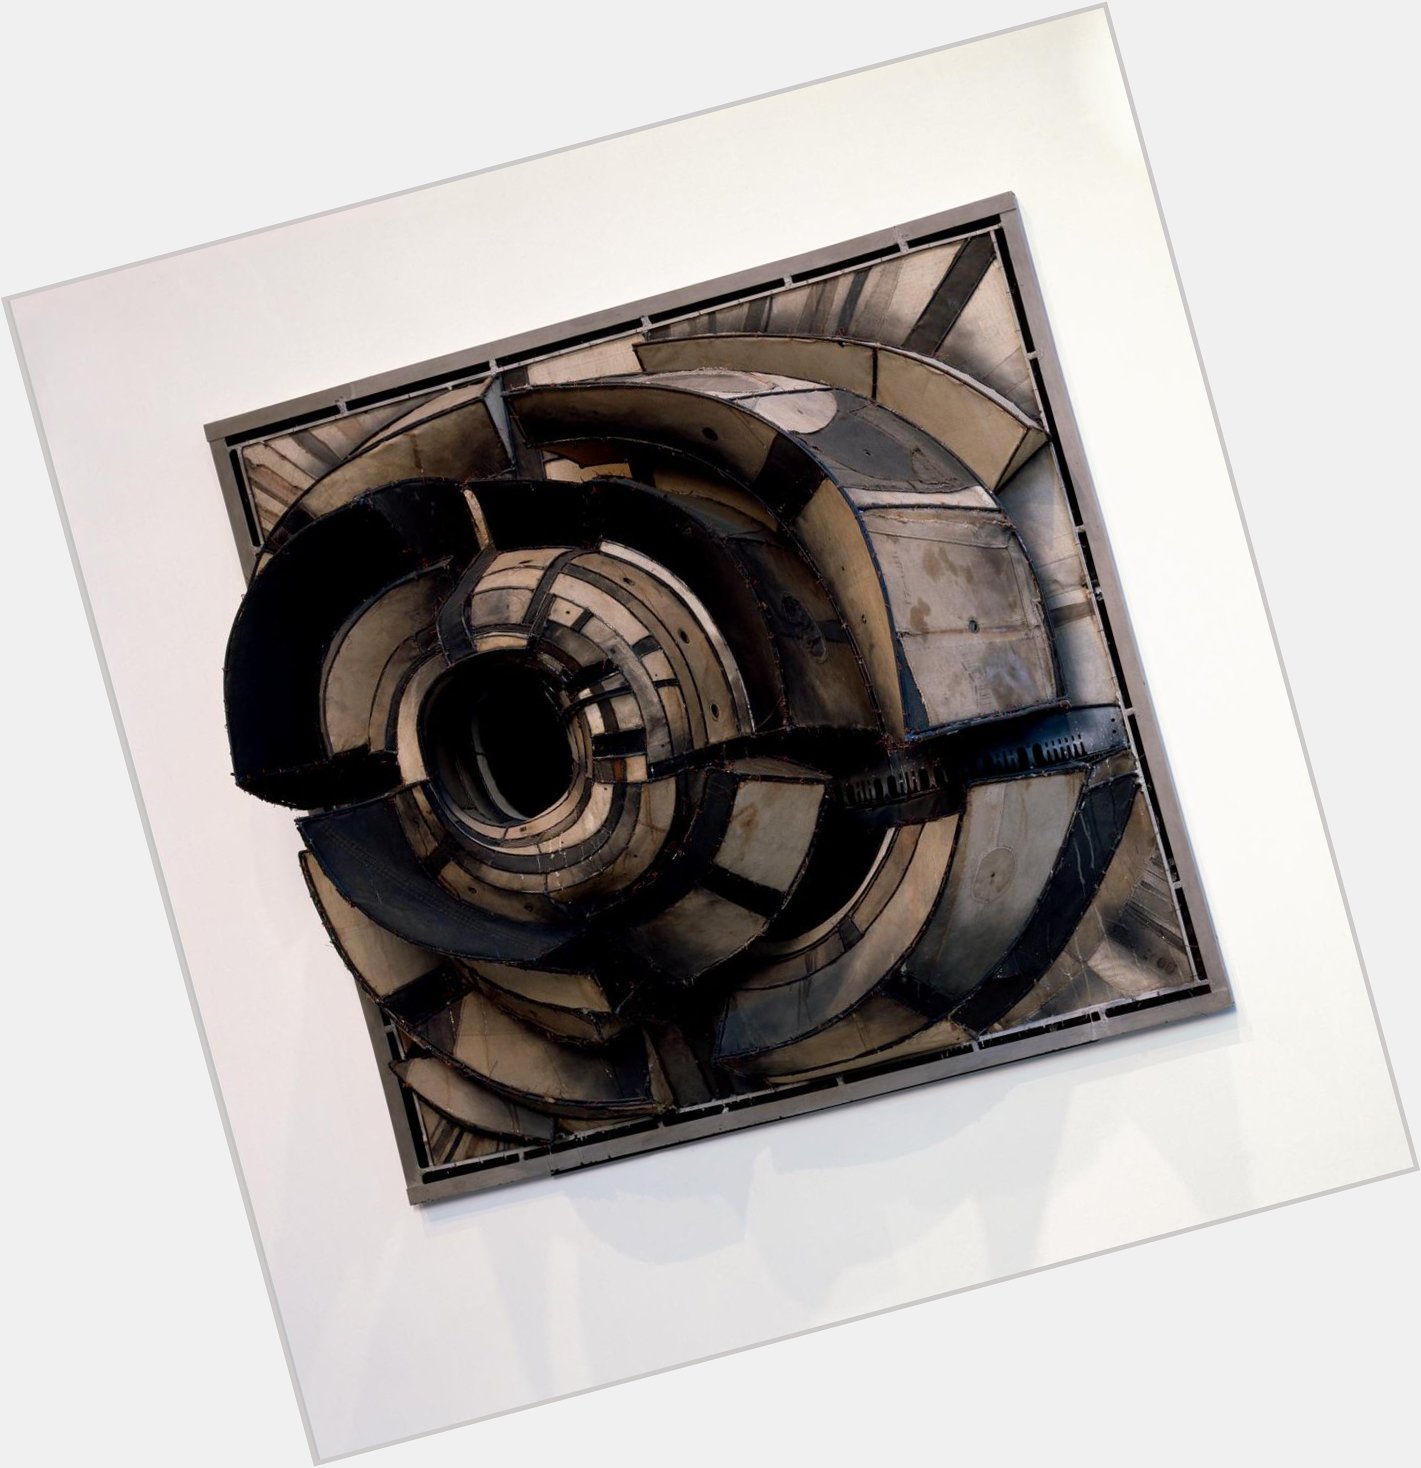 Happy birthday to Lee Bontecou, who bridged painting & sculpture with her abstract work.  